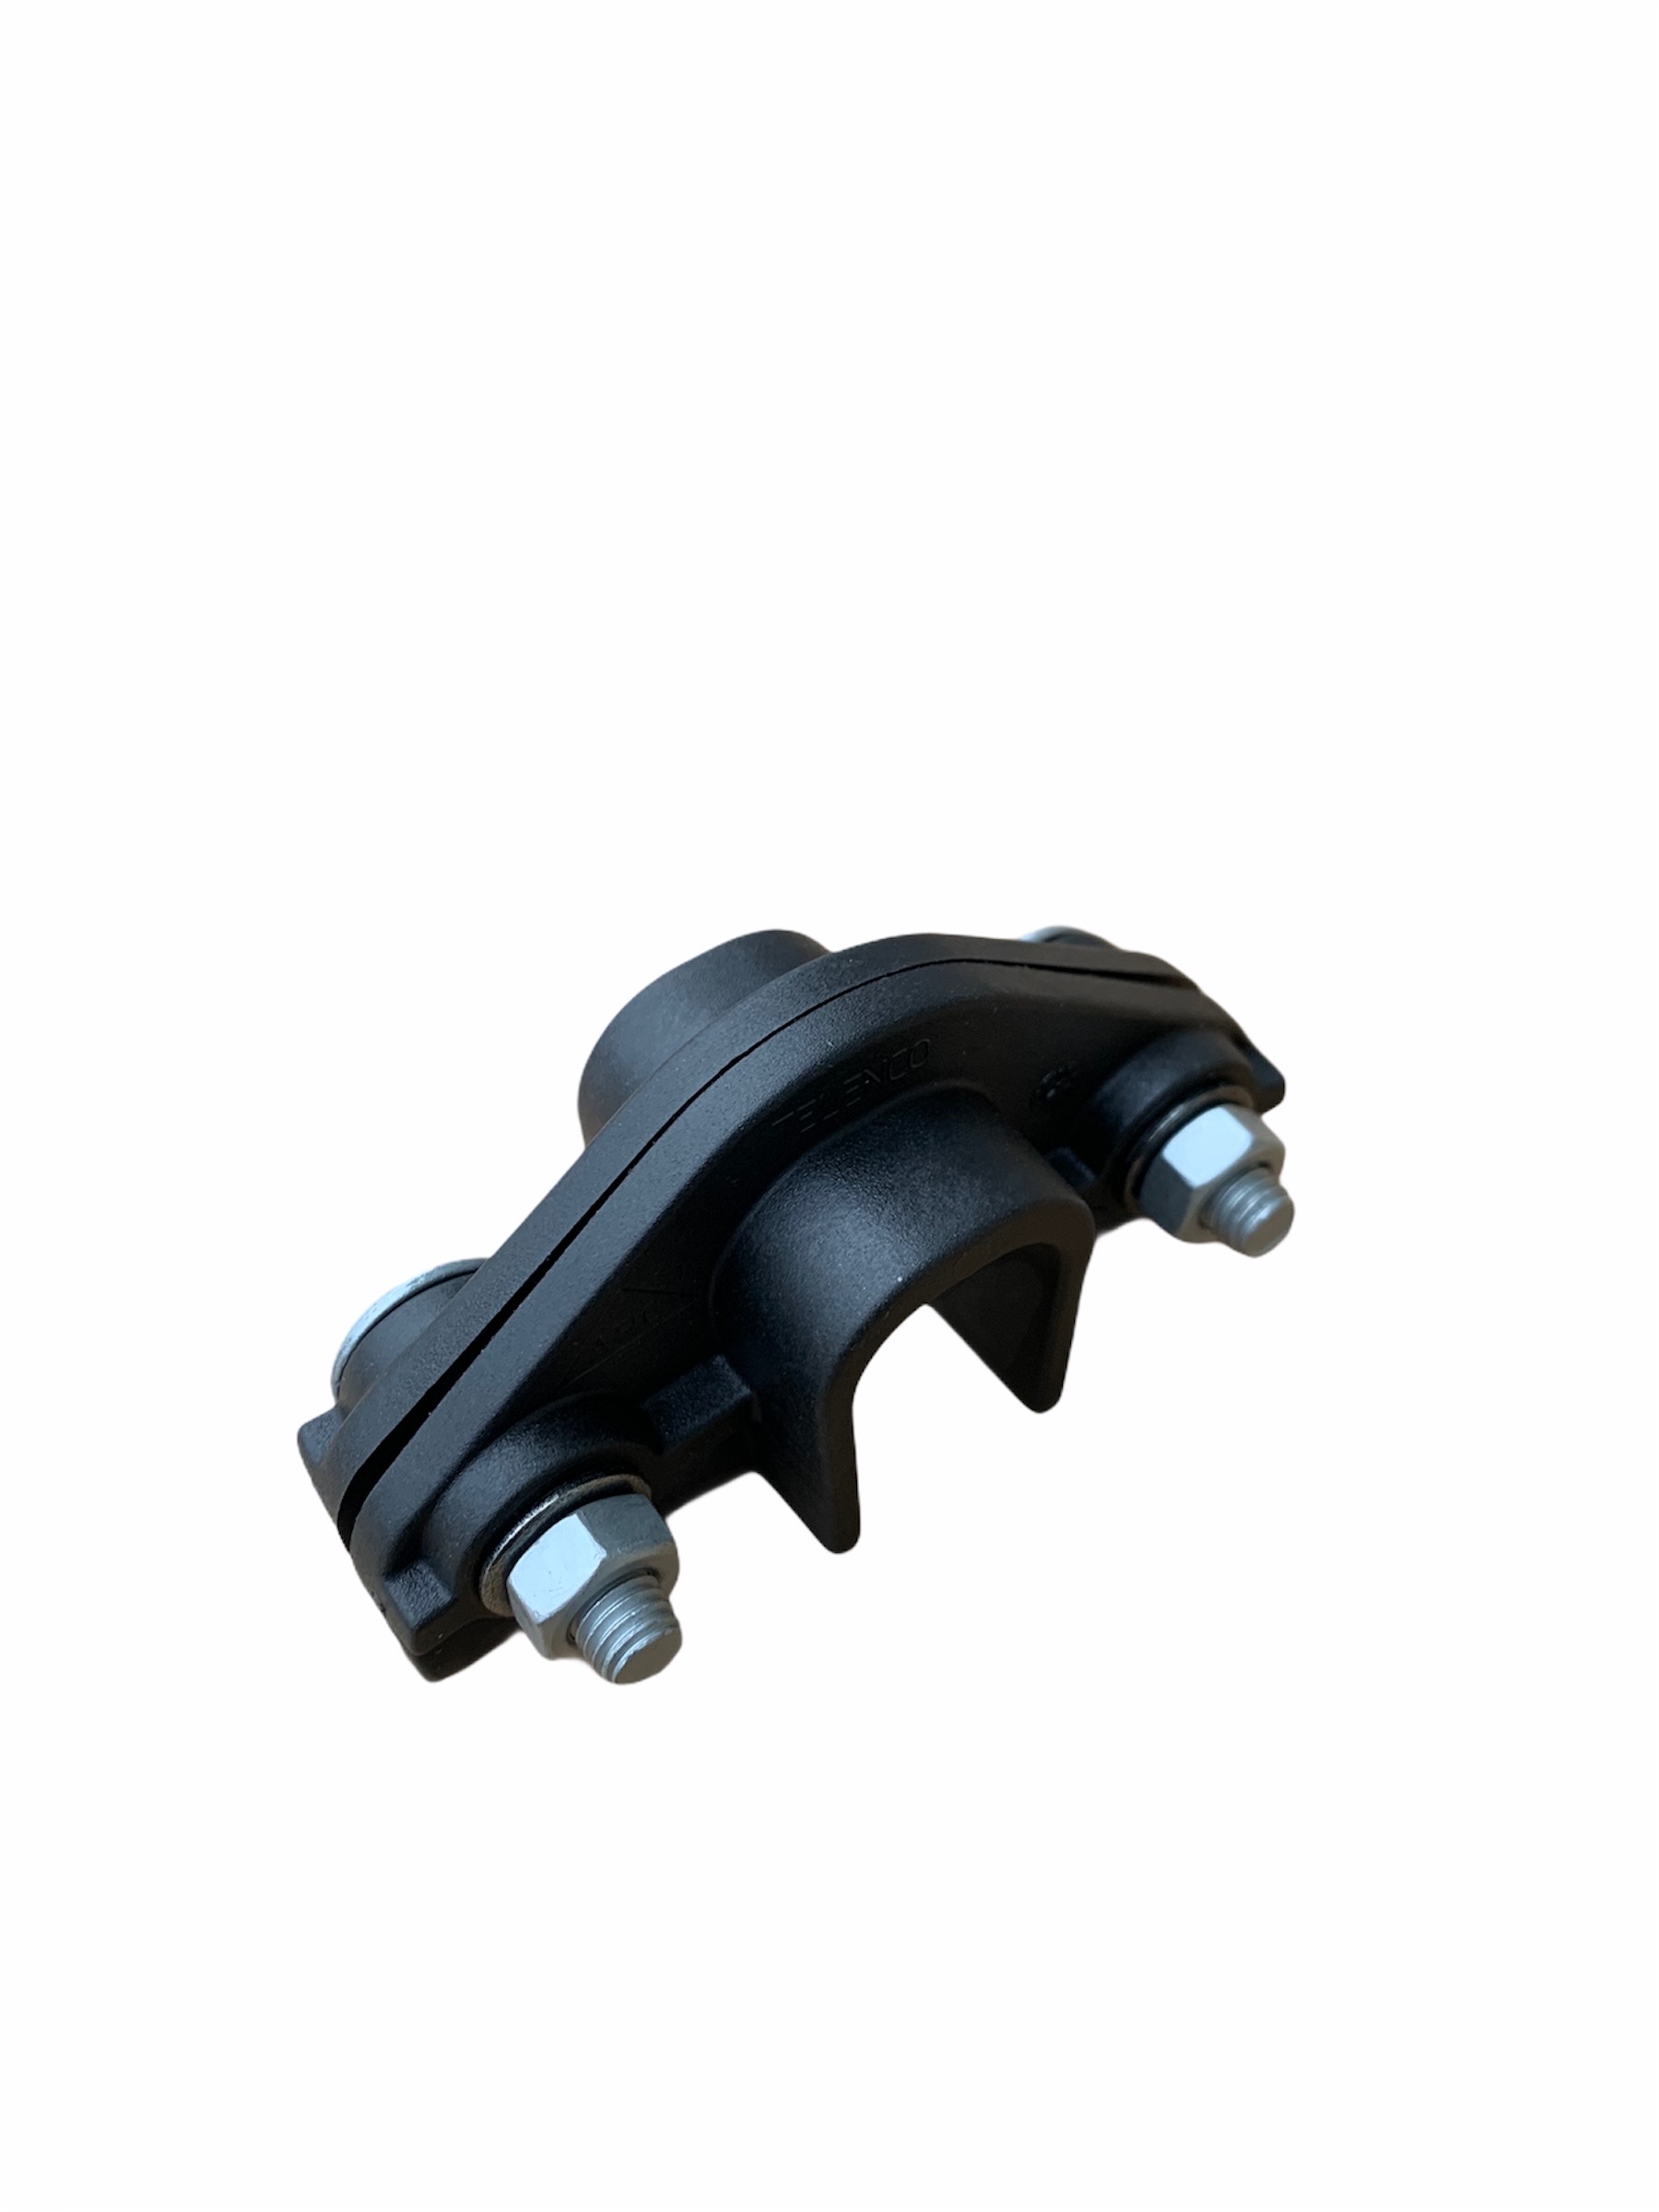 ARC 6 to 9mm Aerial Cable Relief Clamp